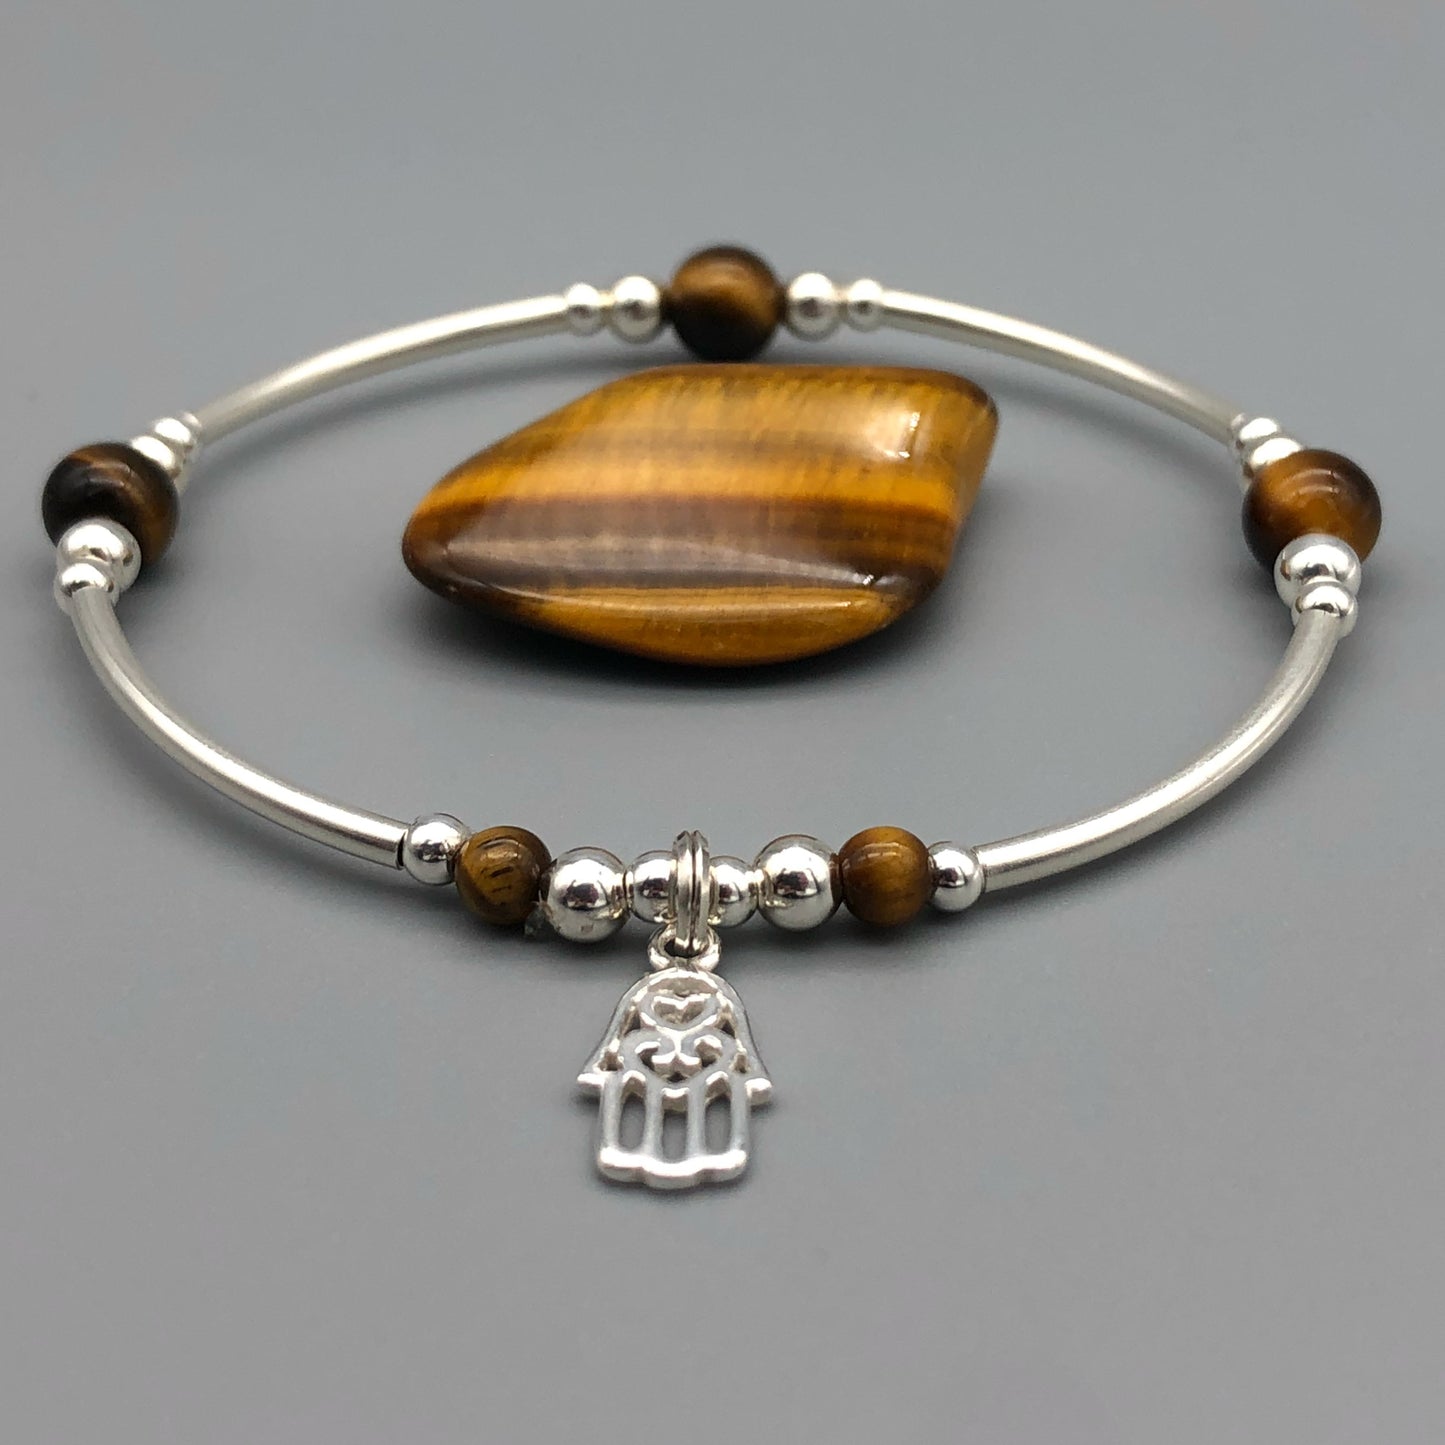 Hamsa Hand Charm Tigers Eye Beads Sterling Silver Women's Stacking Bracelet by My Silver Wish